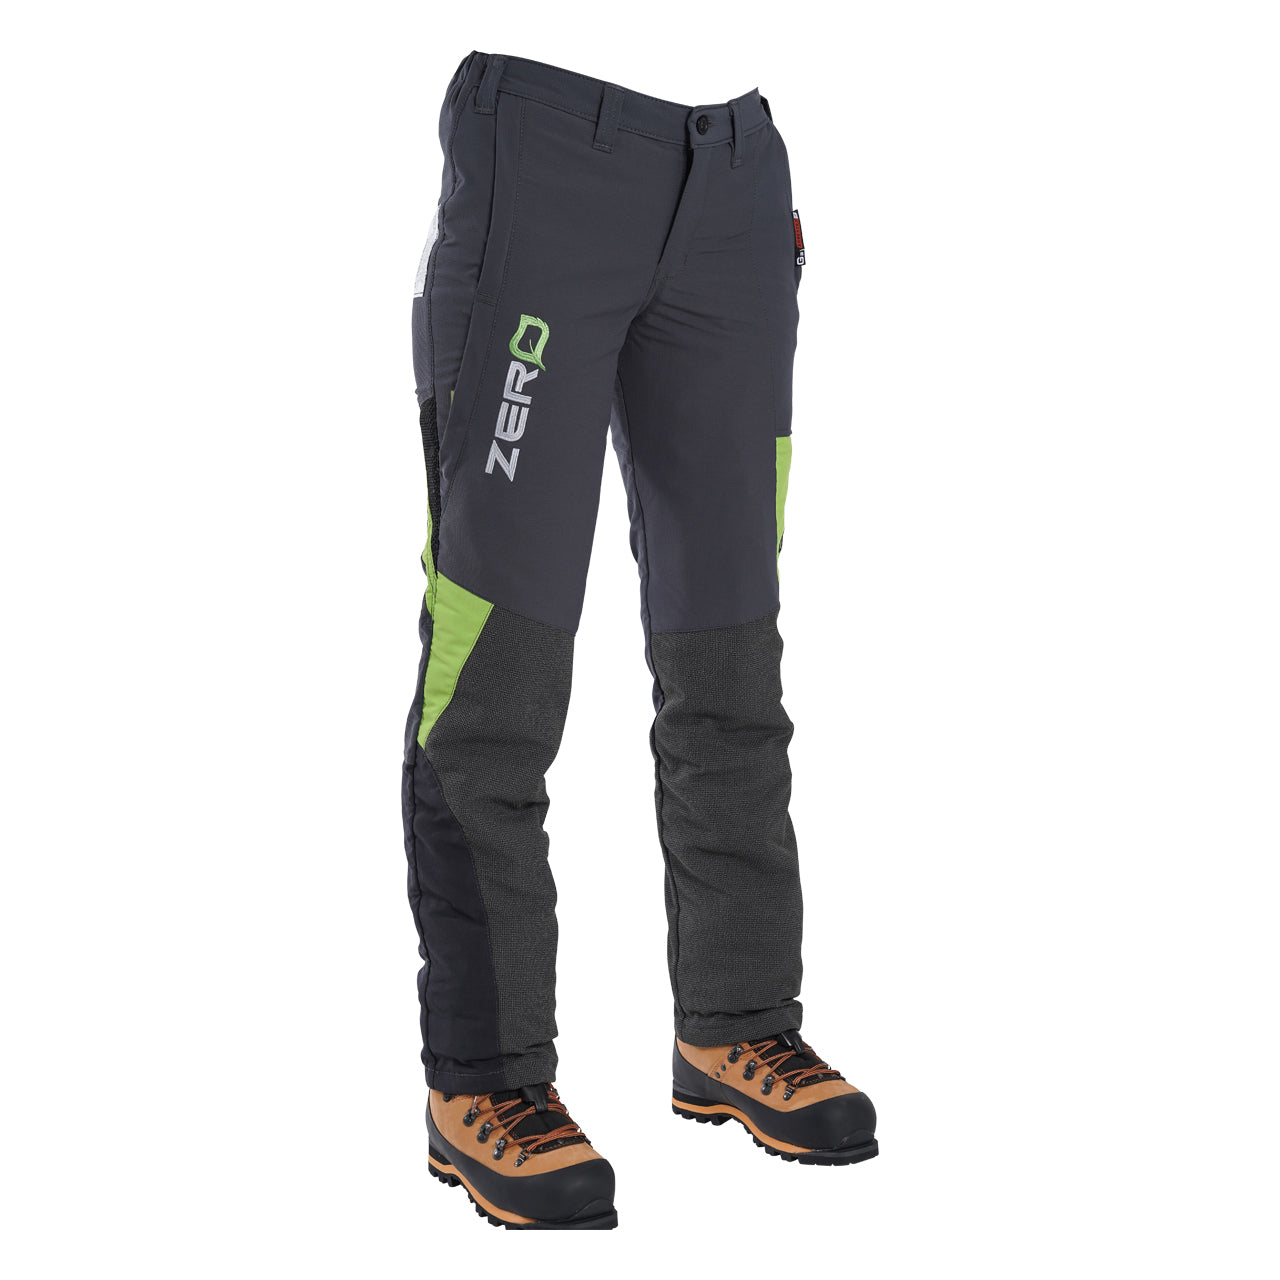 Clogger Zero Gen2 Light and Cool Women's Chainsaw Protective Pants - Grey/Green - RDO Equipment